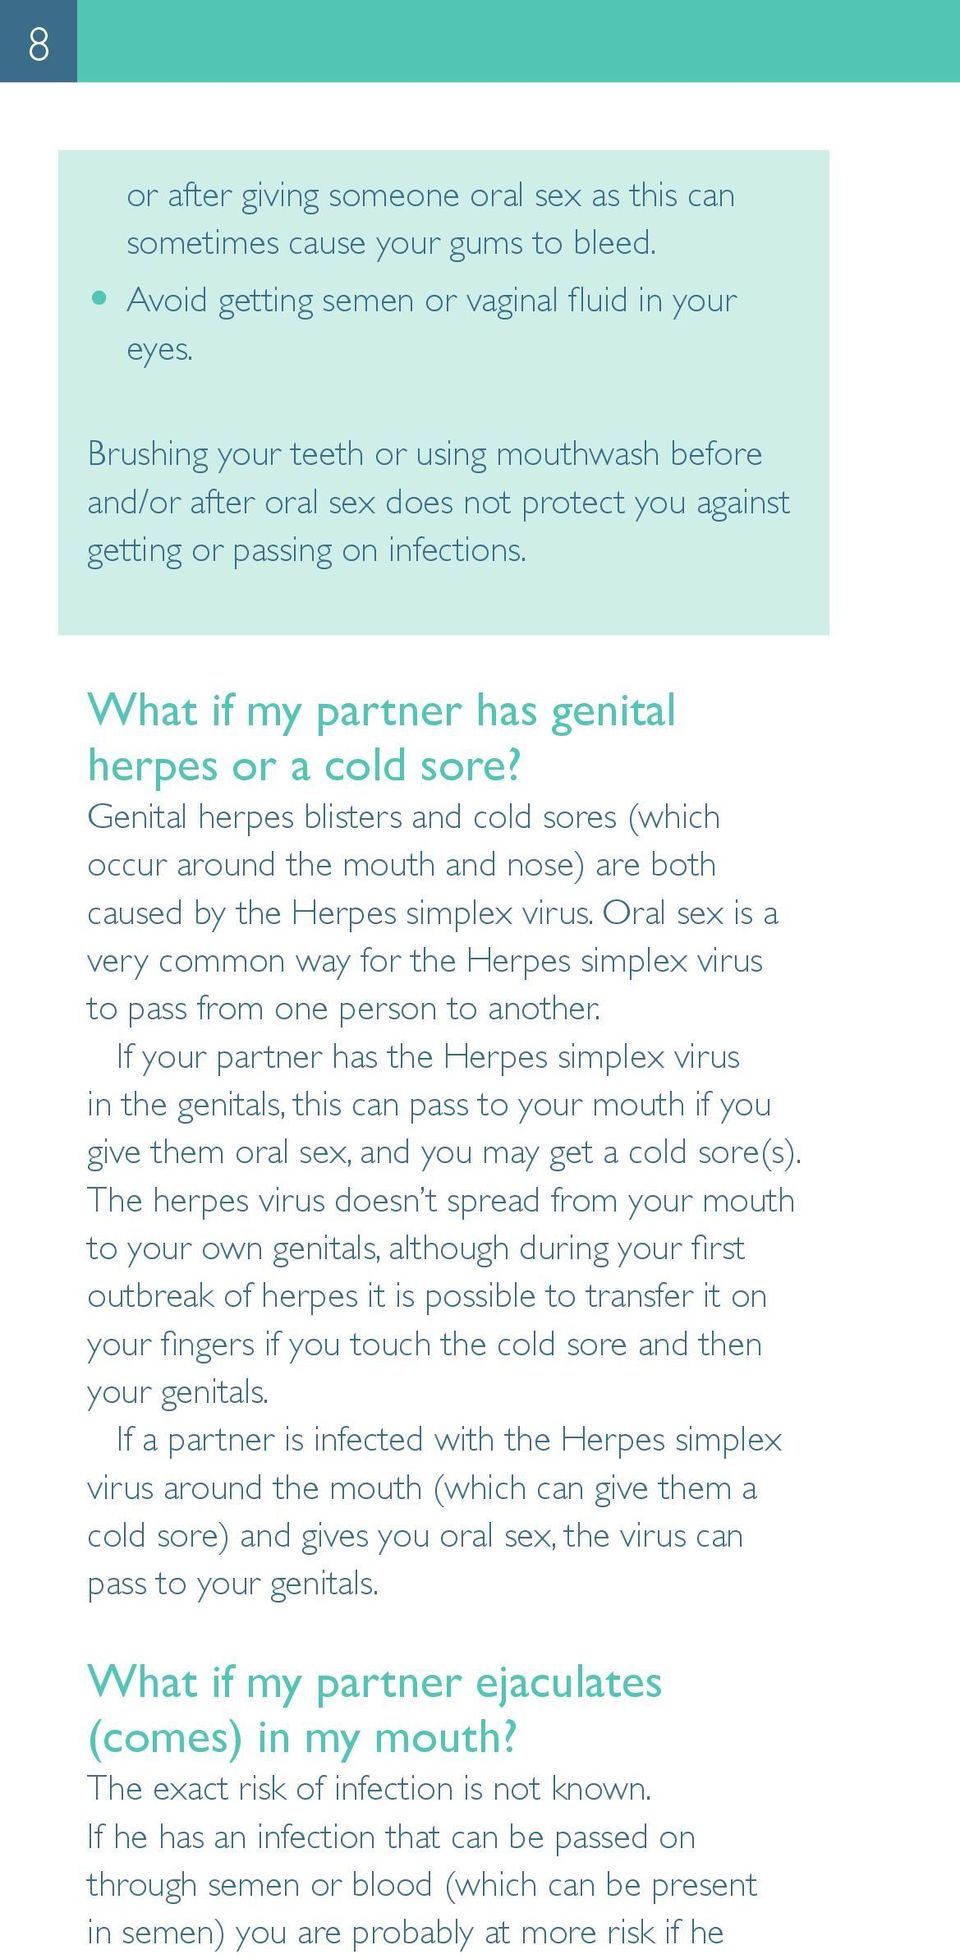 Genital herpes blisters and cold sores (which occur around the mouth and nose) are both caused by the Herpes simplex virus.